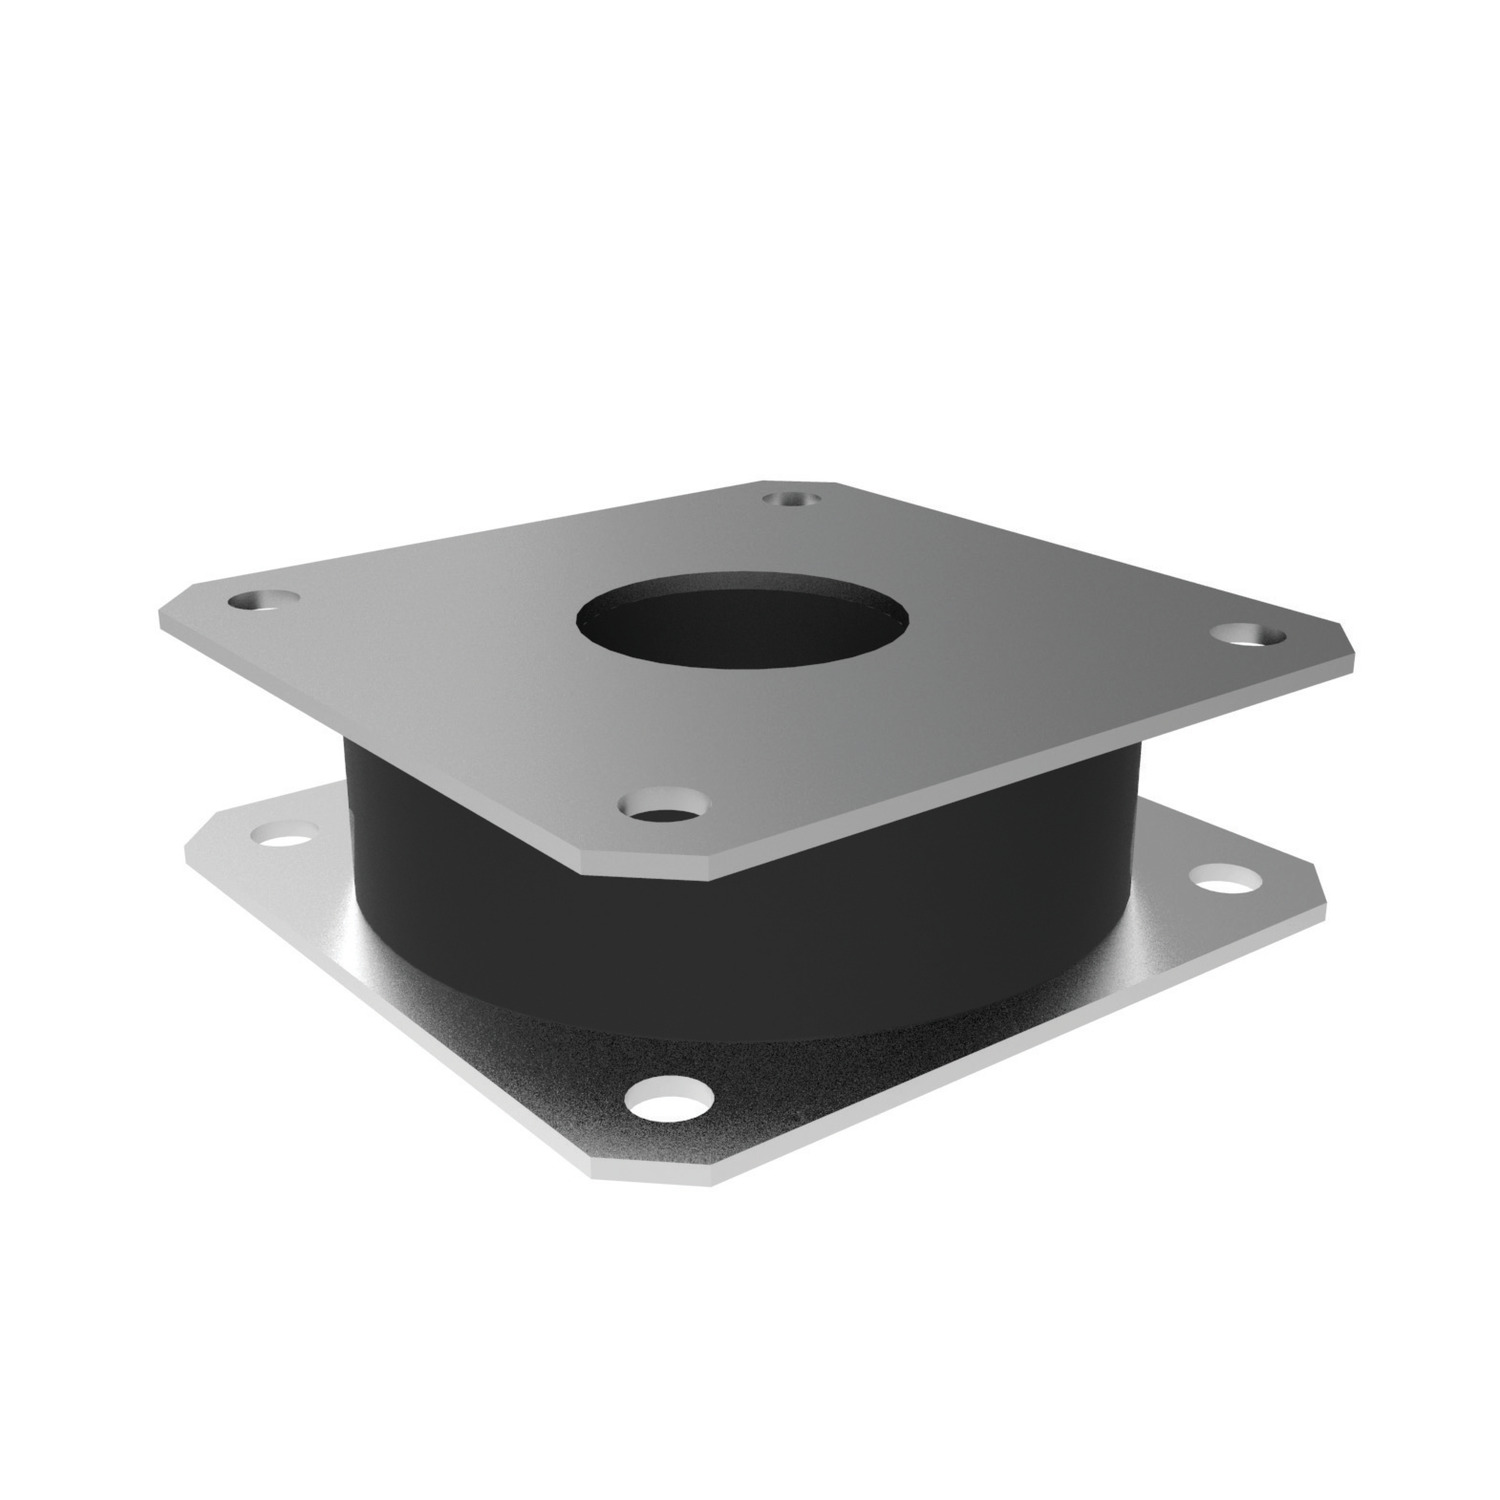 https://www.automotioncomponents.co.uk/media/products/large/a-v-pads-p2054-r.jpg